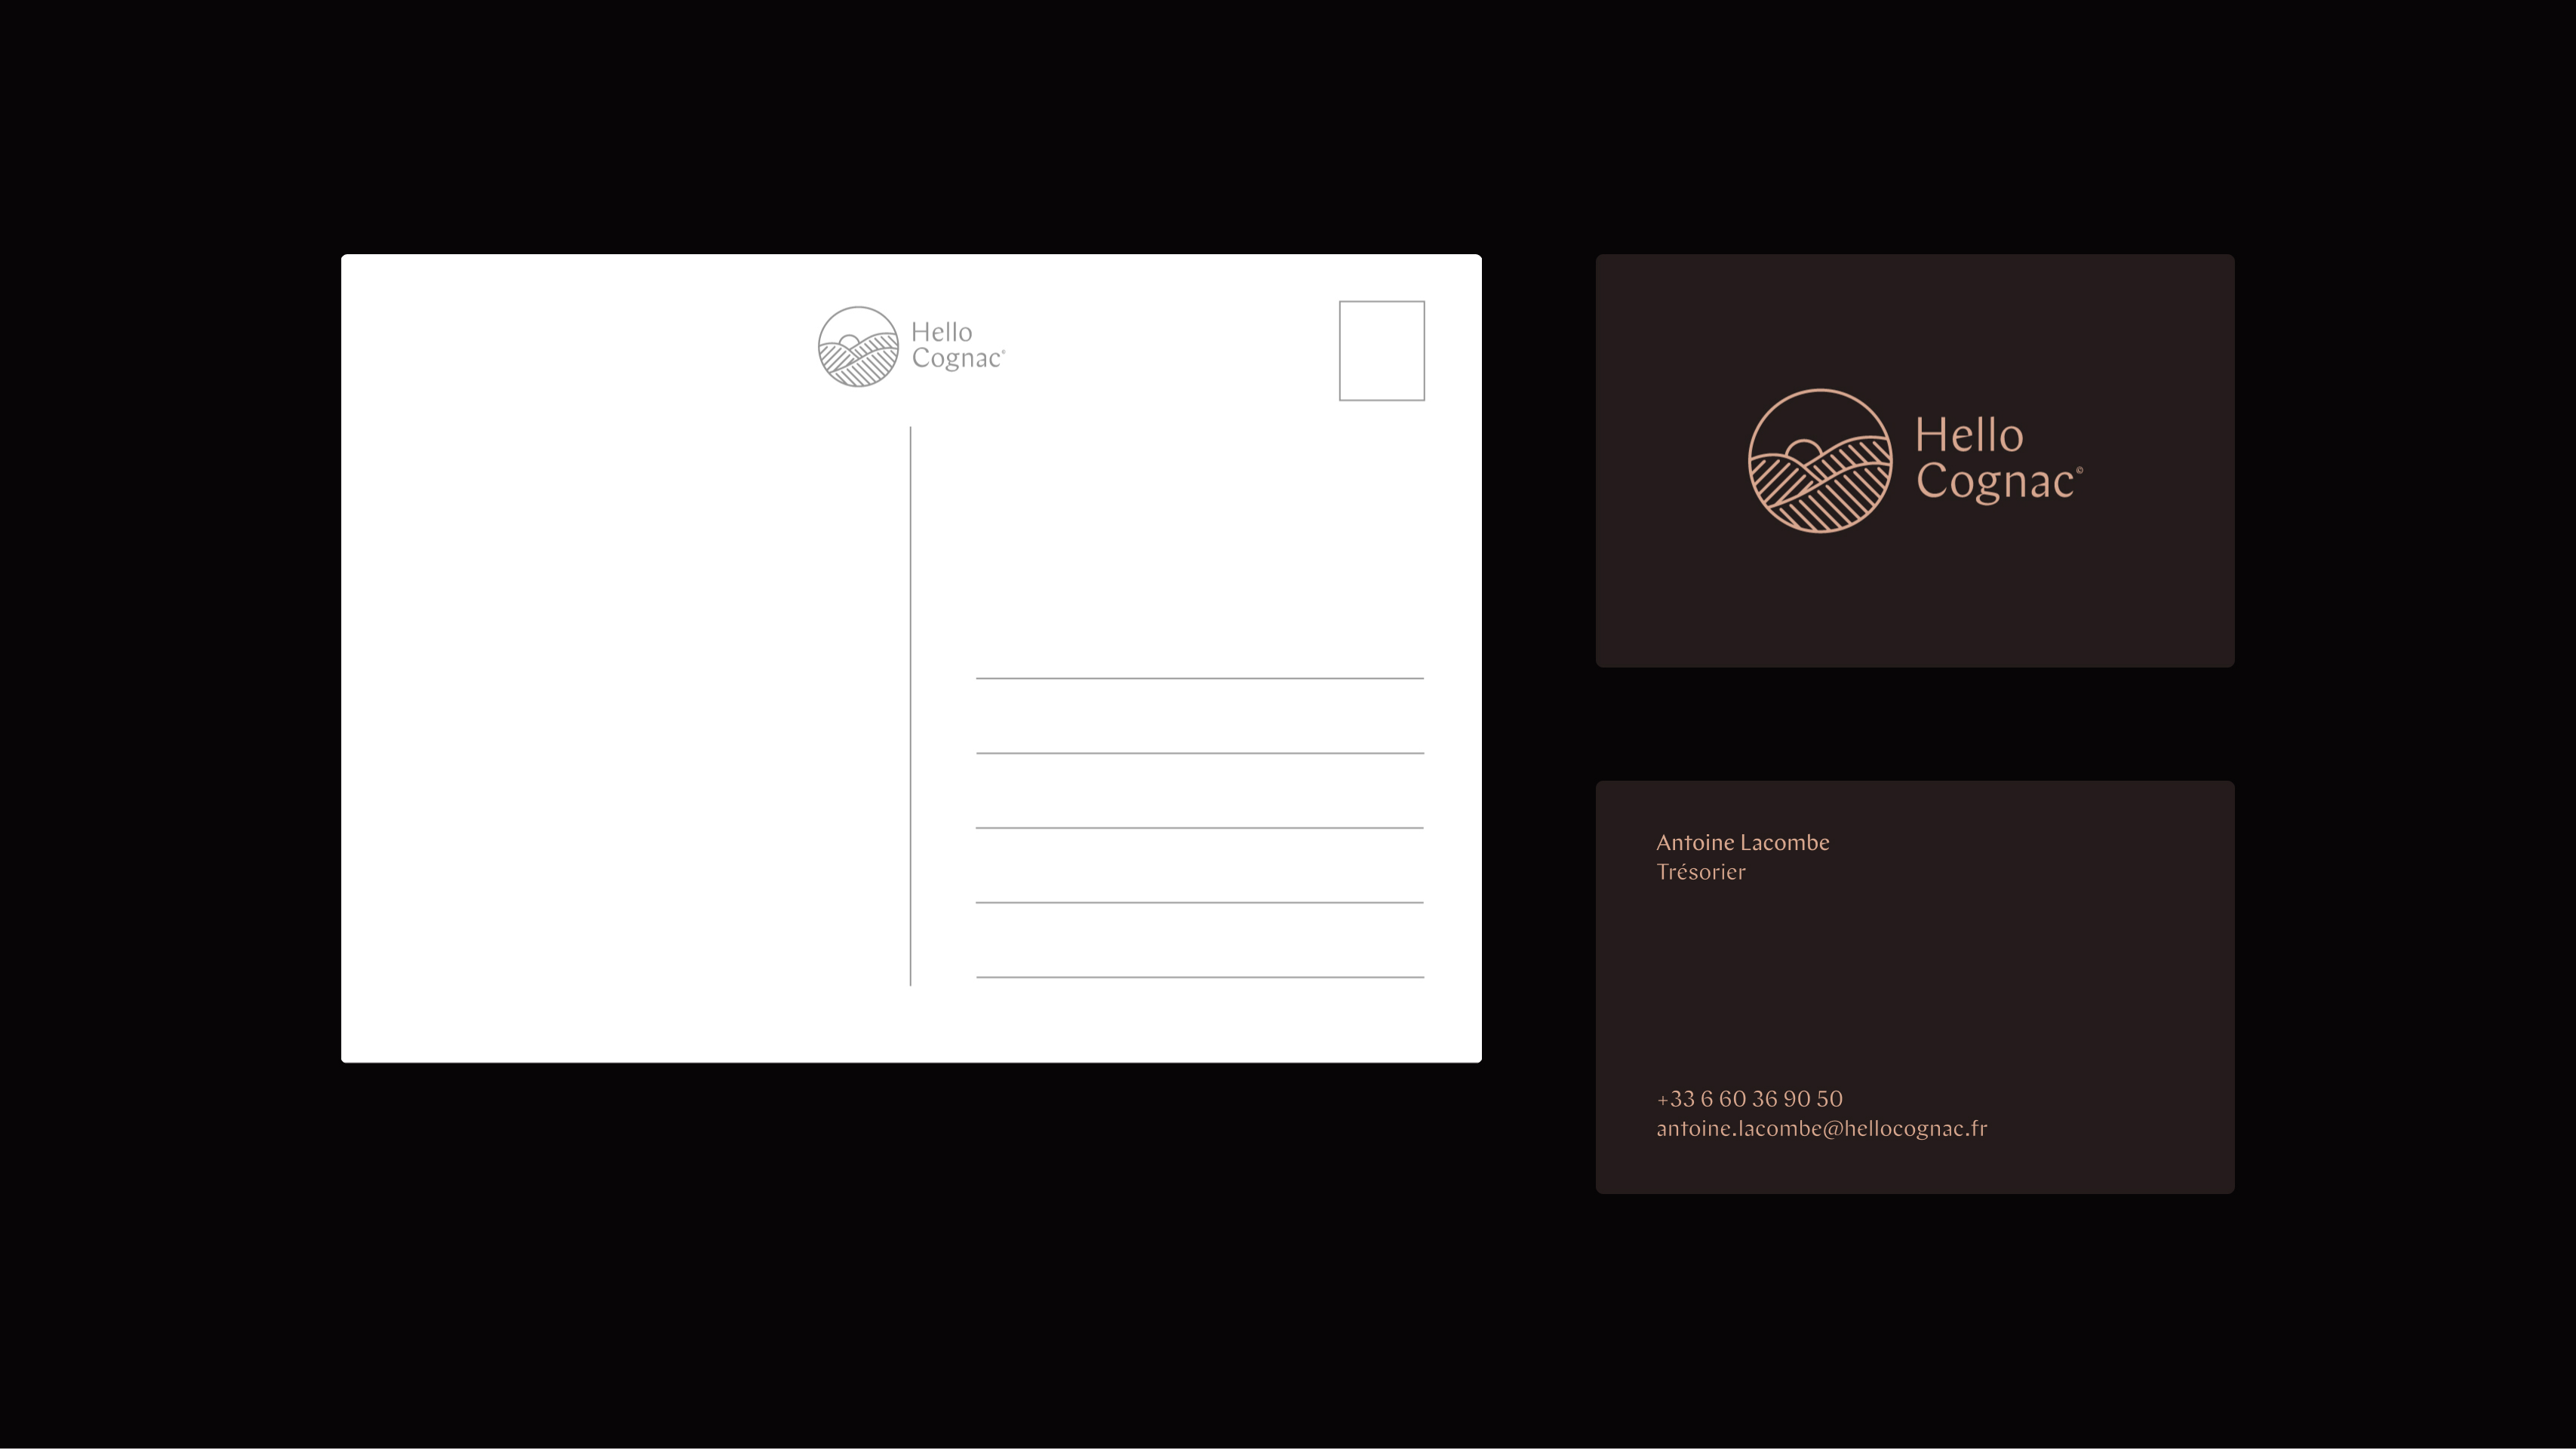 Hello Cognac prints : post cards and business cards